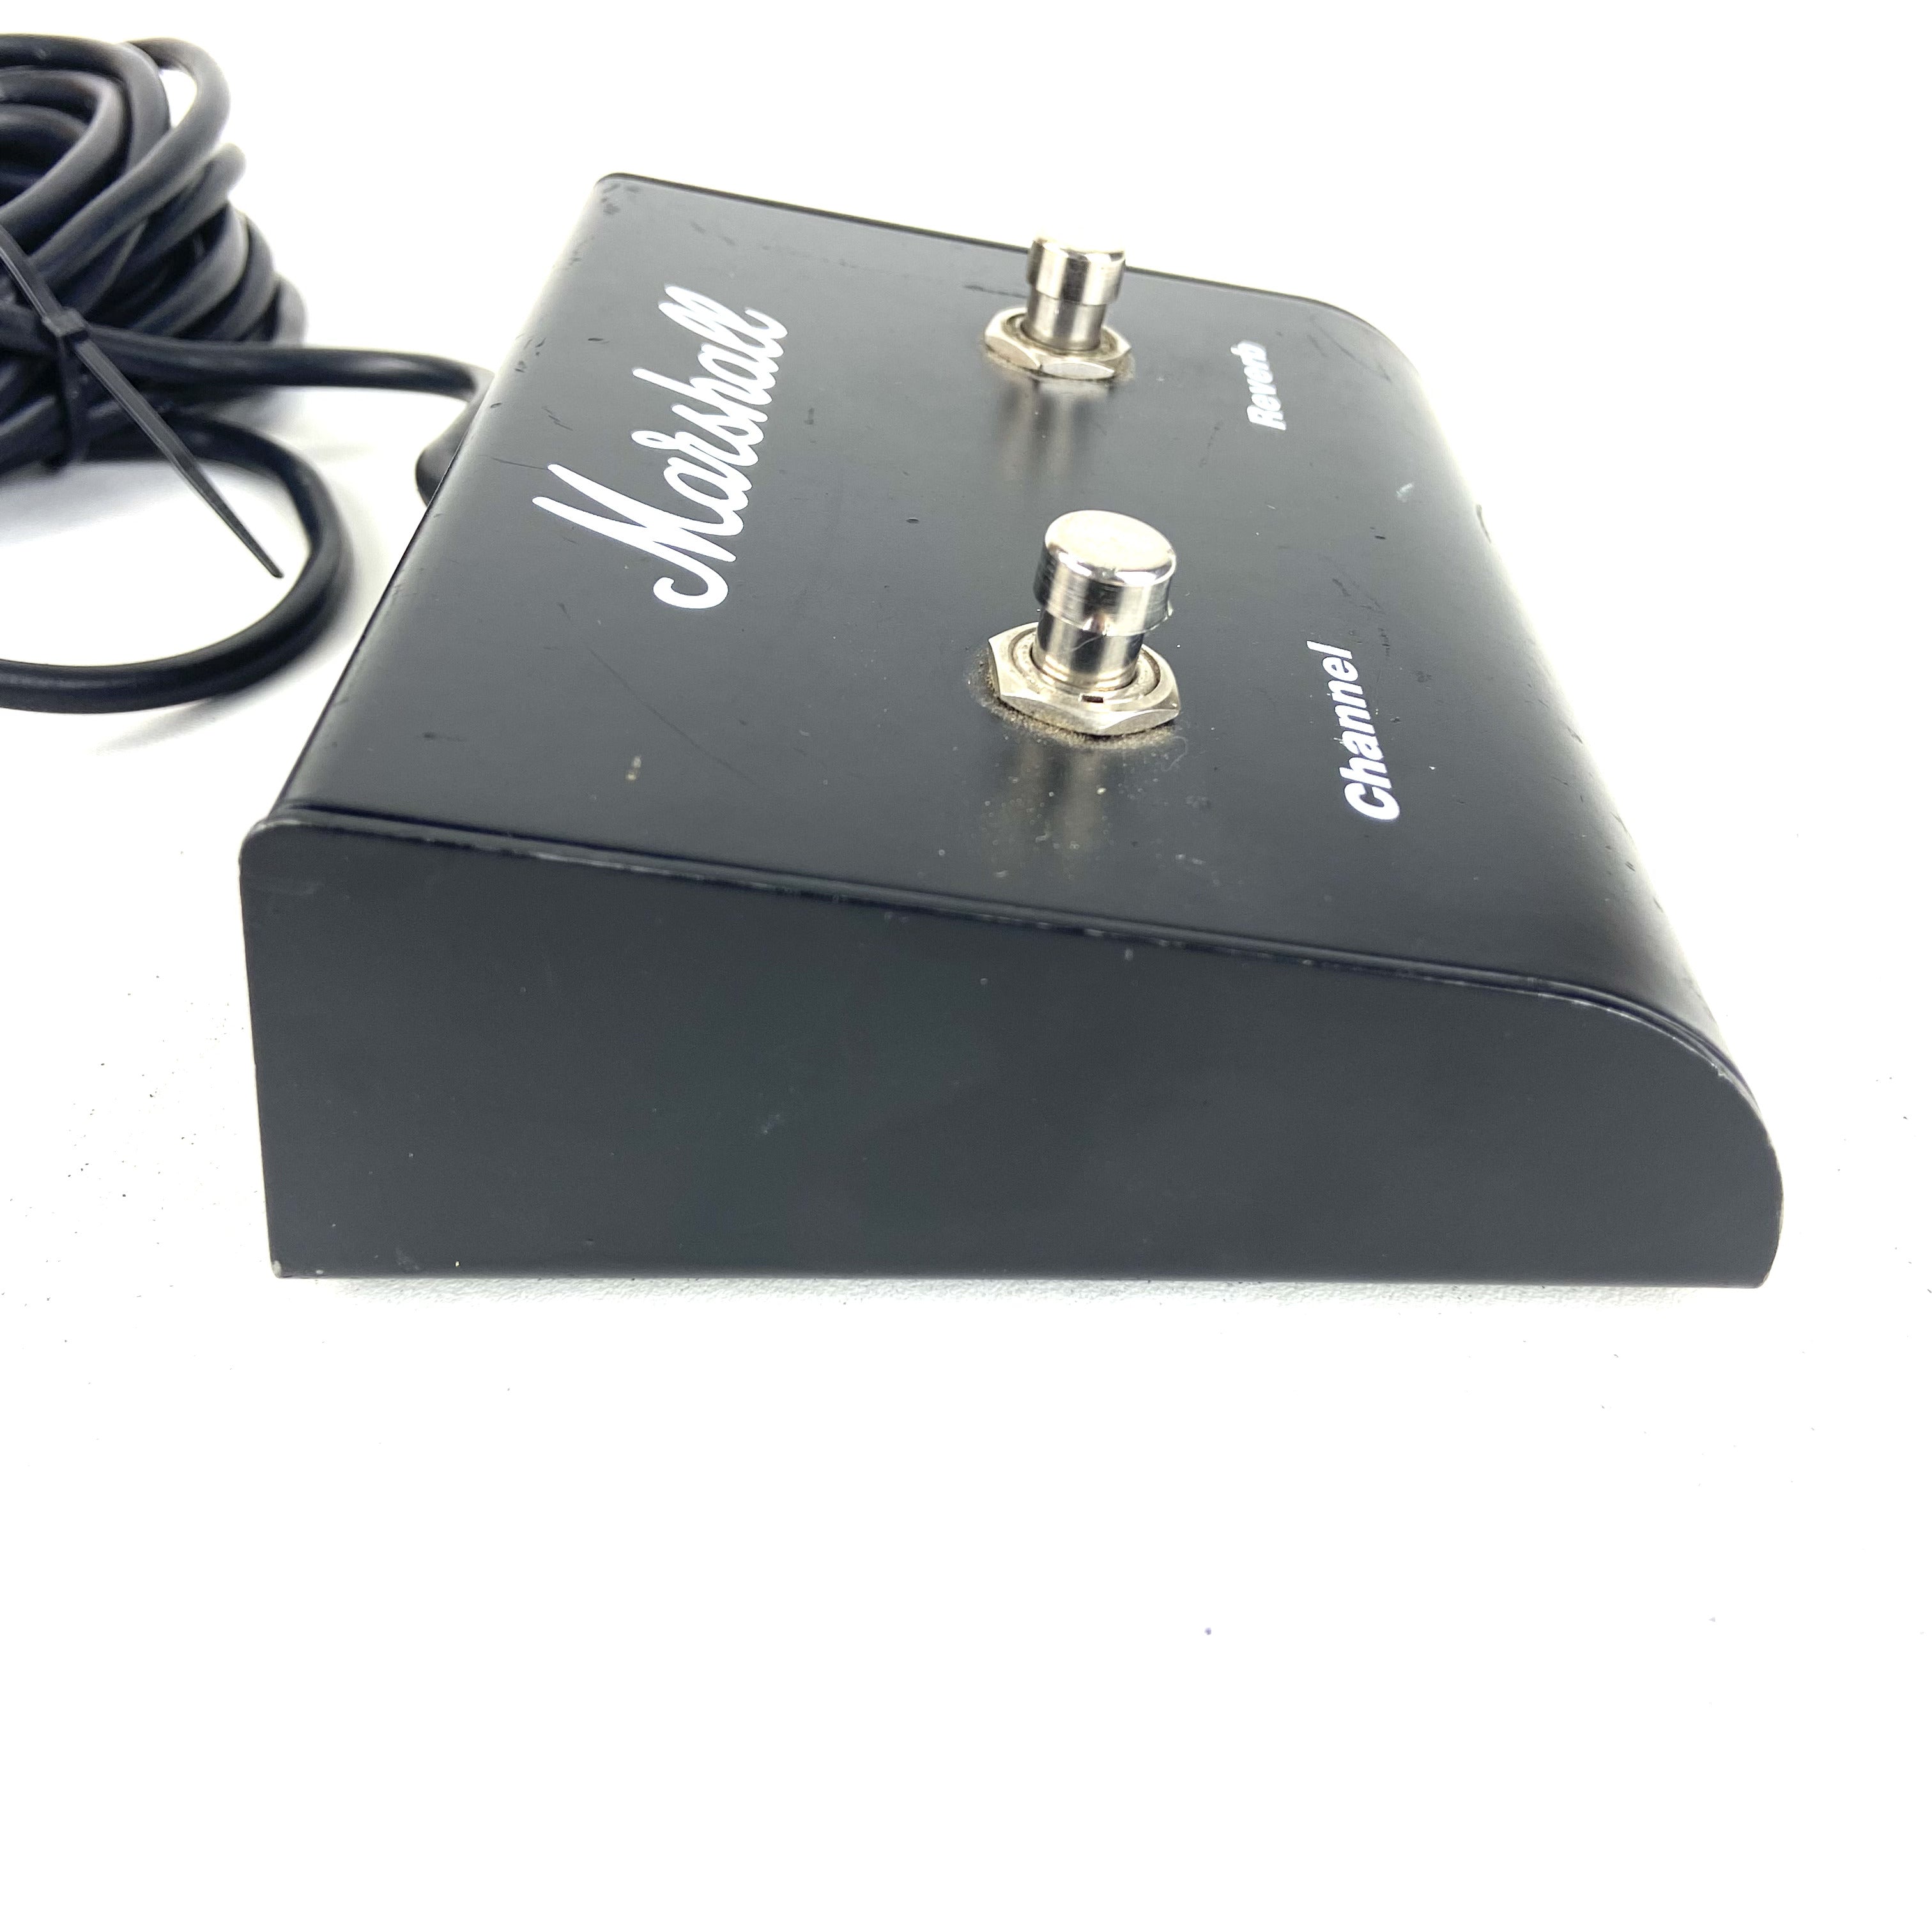 PRE-OWNED MARSHALL PEDL-10009 FOOTSWITCH